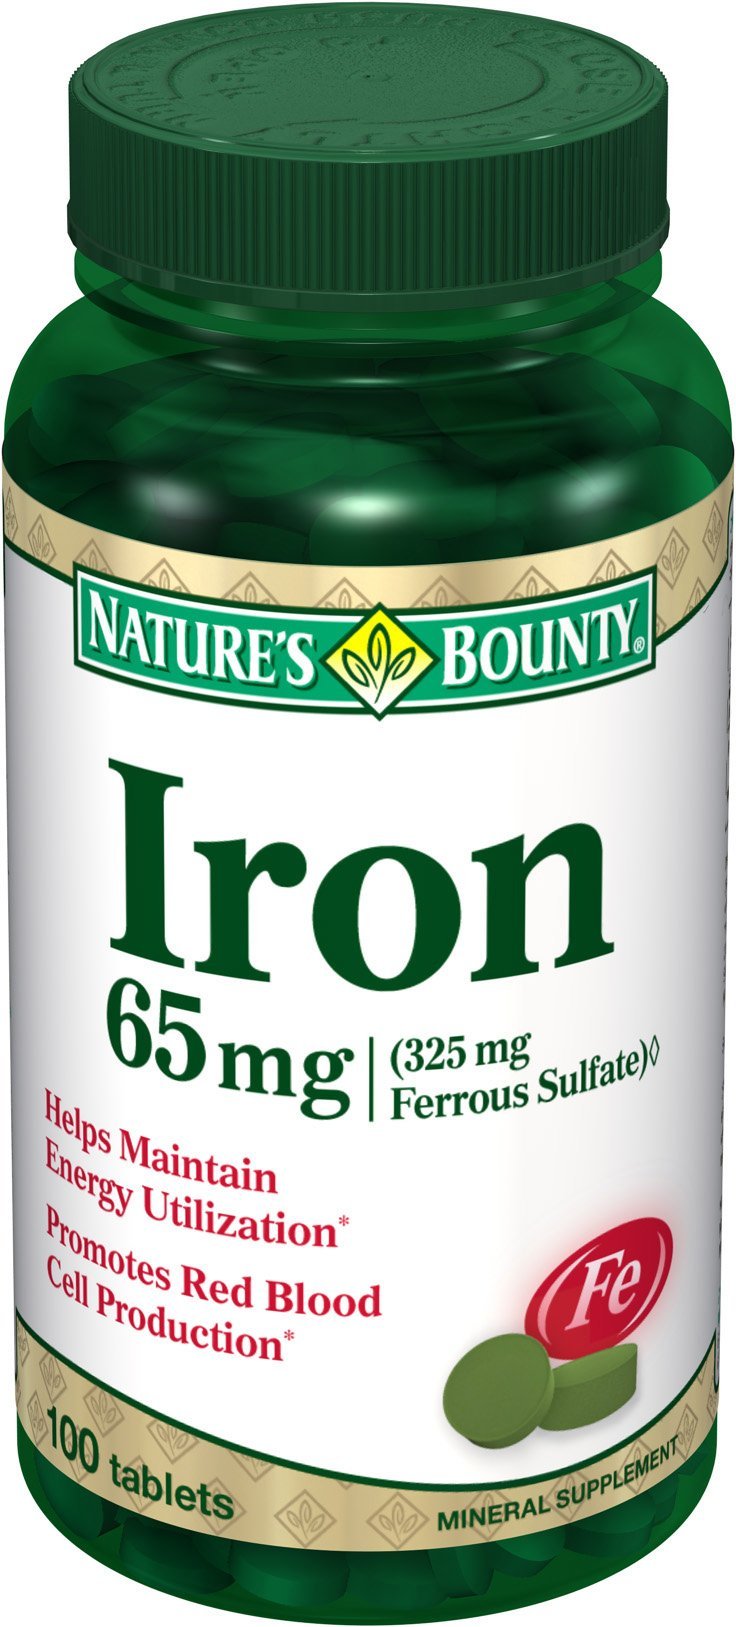 Nature's Bounty Iron 65 Mg.(325 mg Ferrous Sulfate), 100 Tablets, (Pack of 2) 100 Count (Pack of 2) - BeesActive Australia